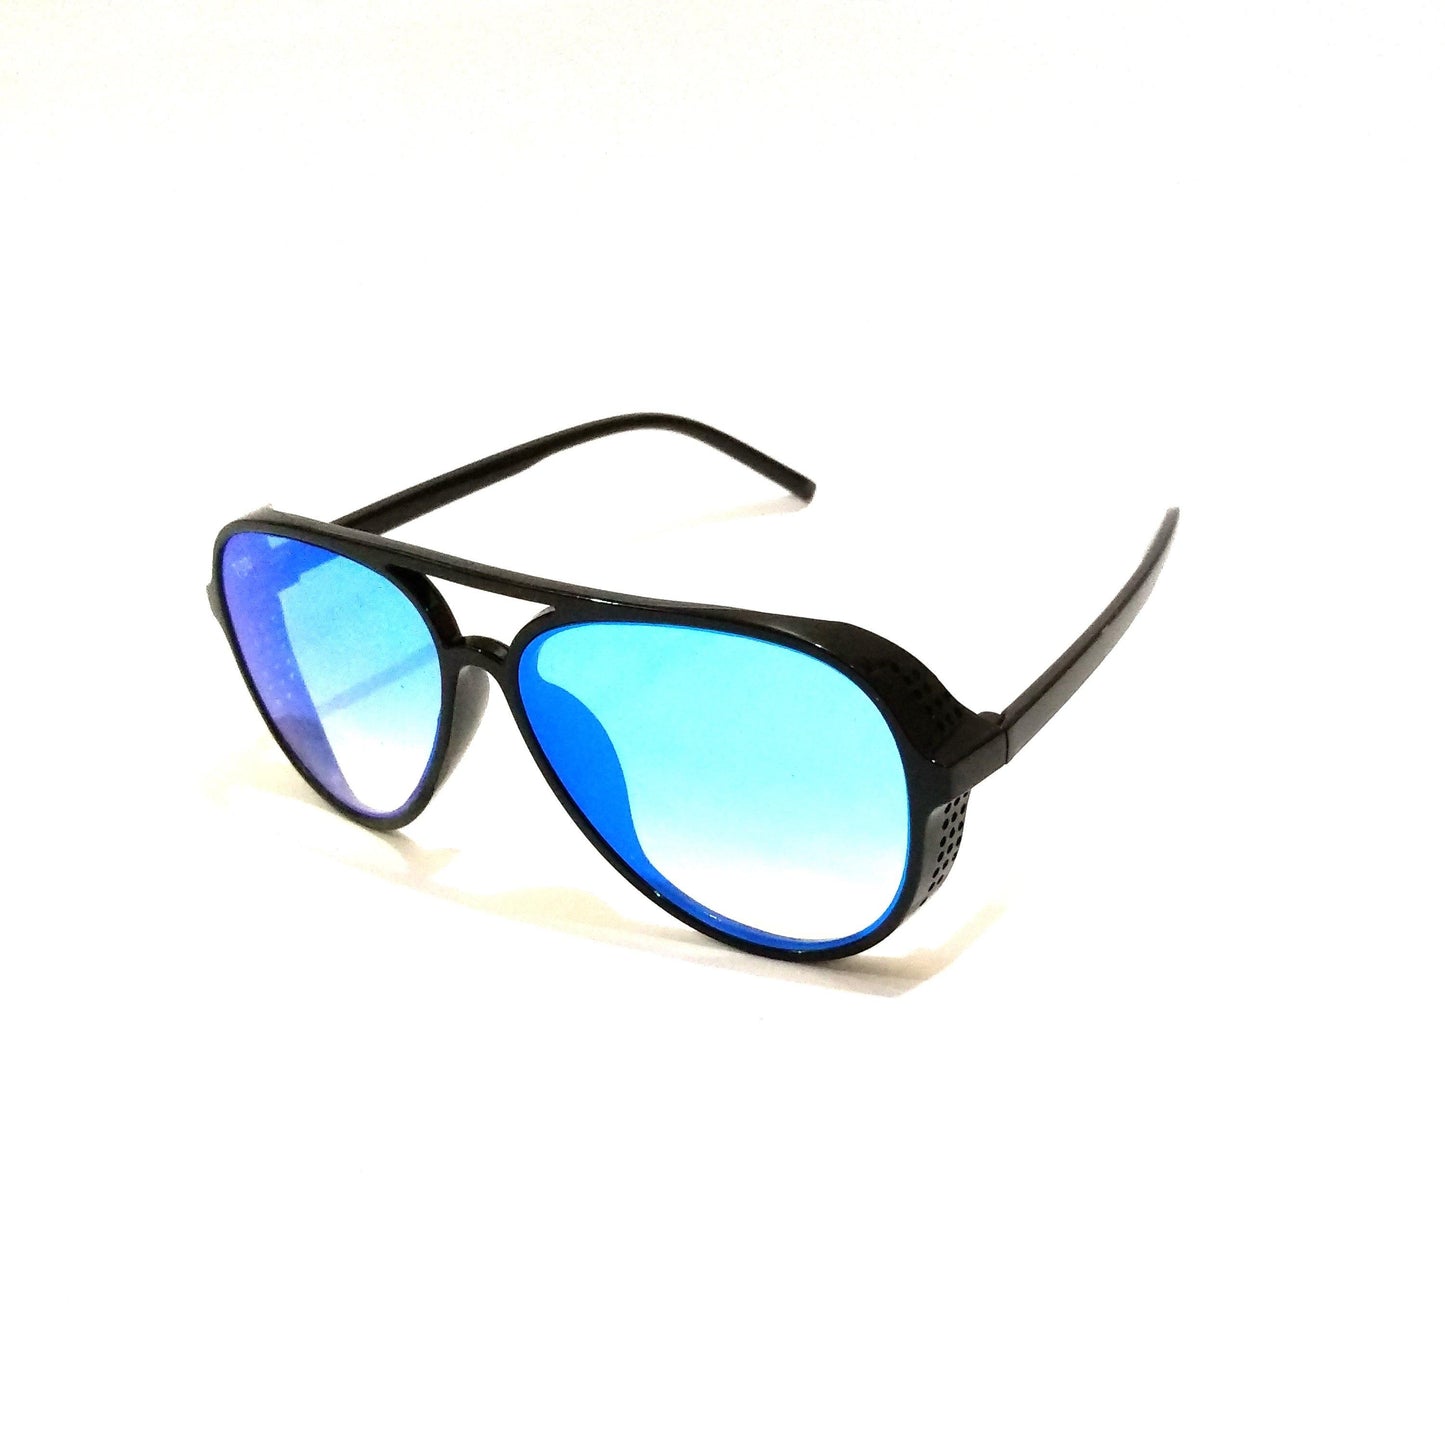 Buy Blue Mirror Steampunk Aviator Sunglasses for Men - Glasses India Online in India